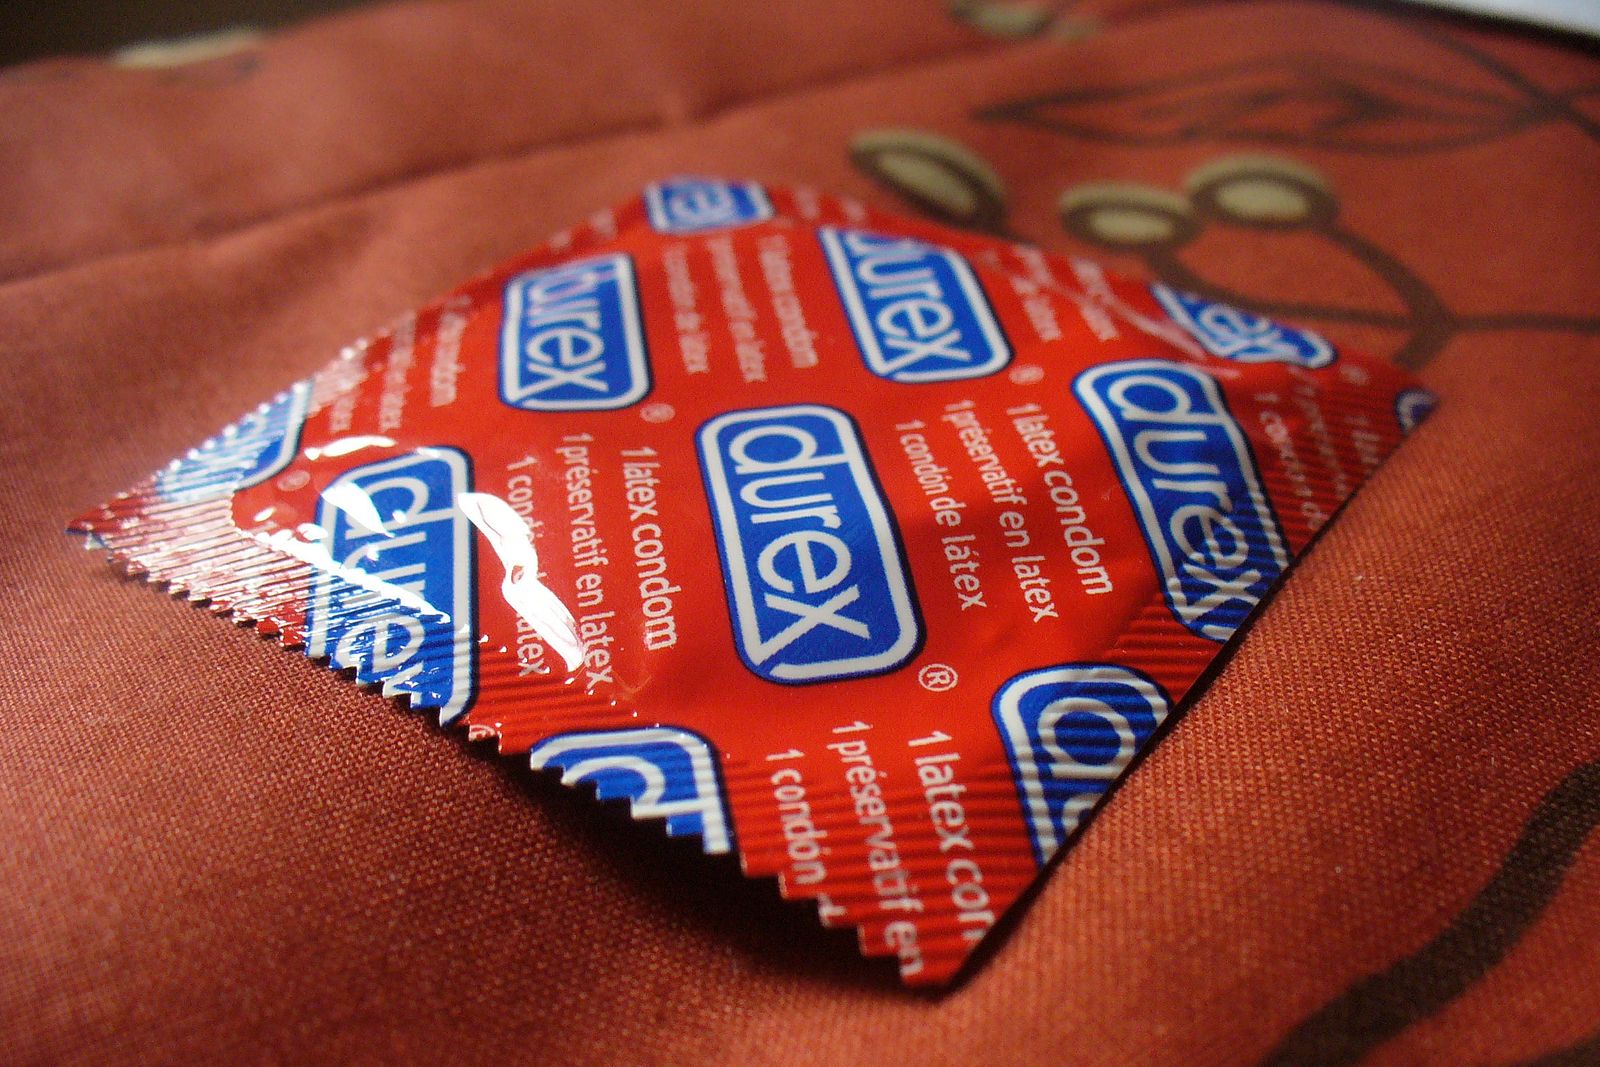 Vietnam to Subsidize Condoms After Young Couple Uses Plastic Bag As Contraceptive